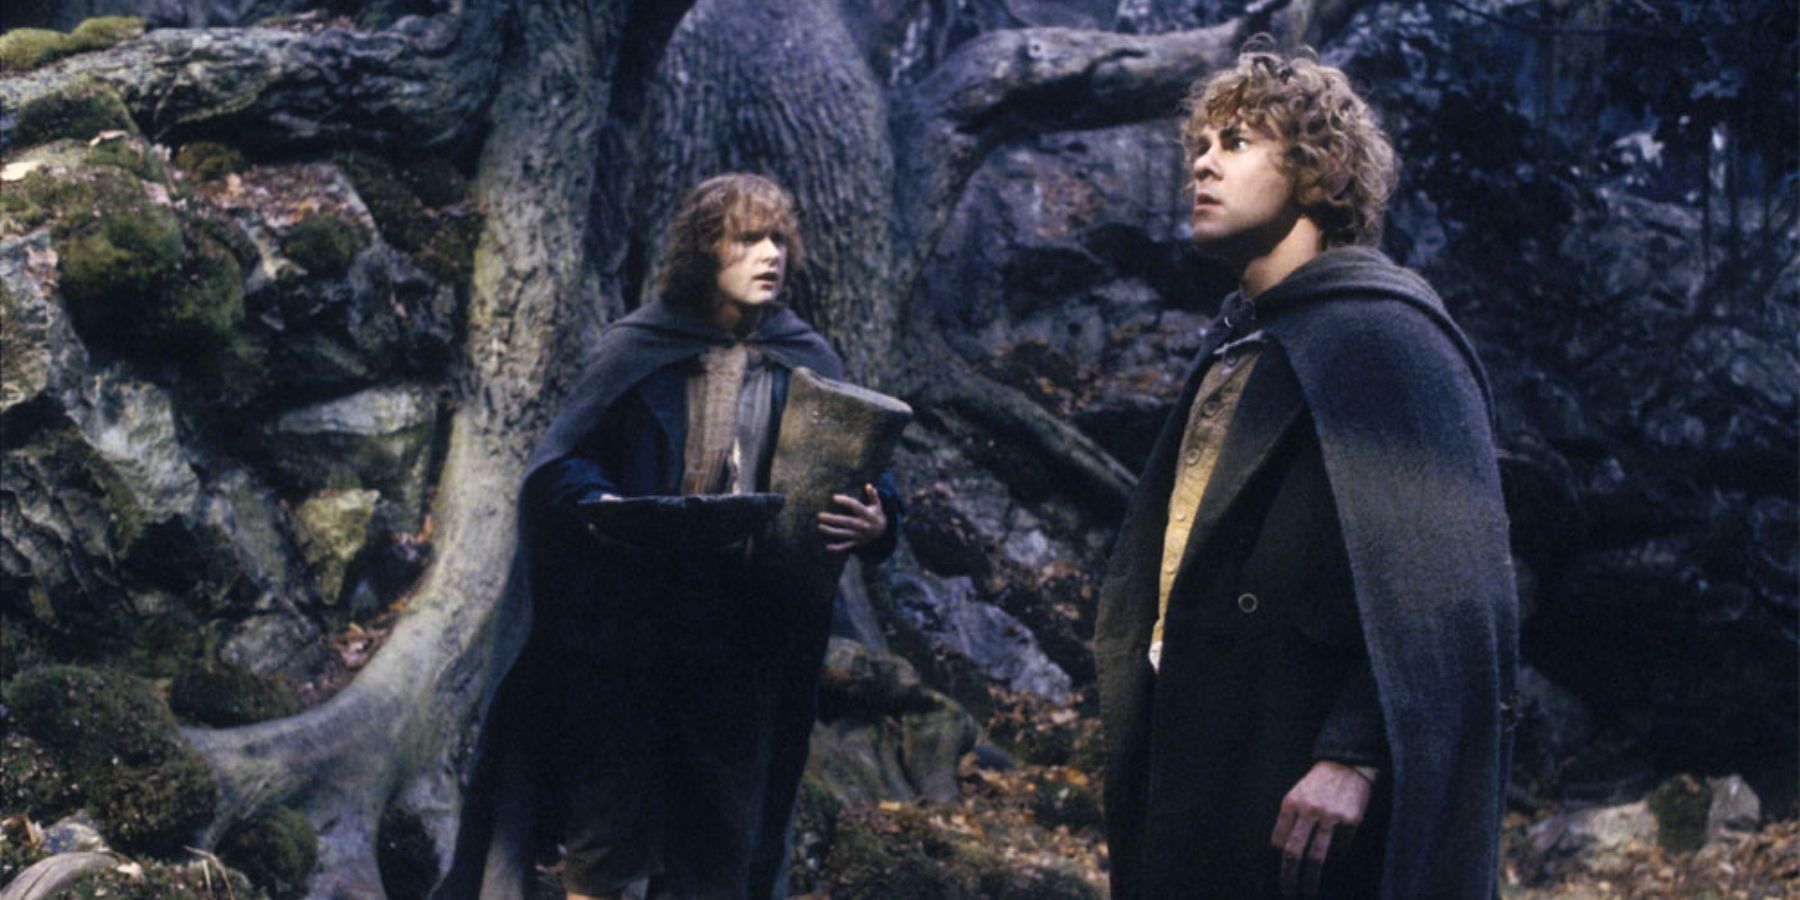 Merry and Pippin in Fangorn